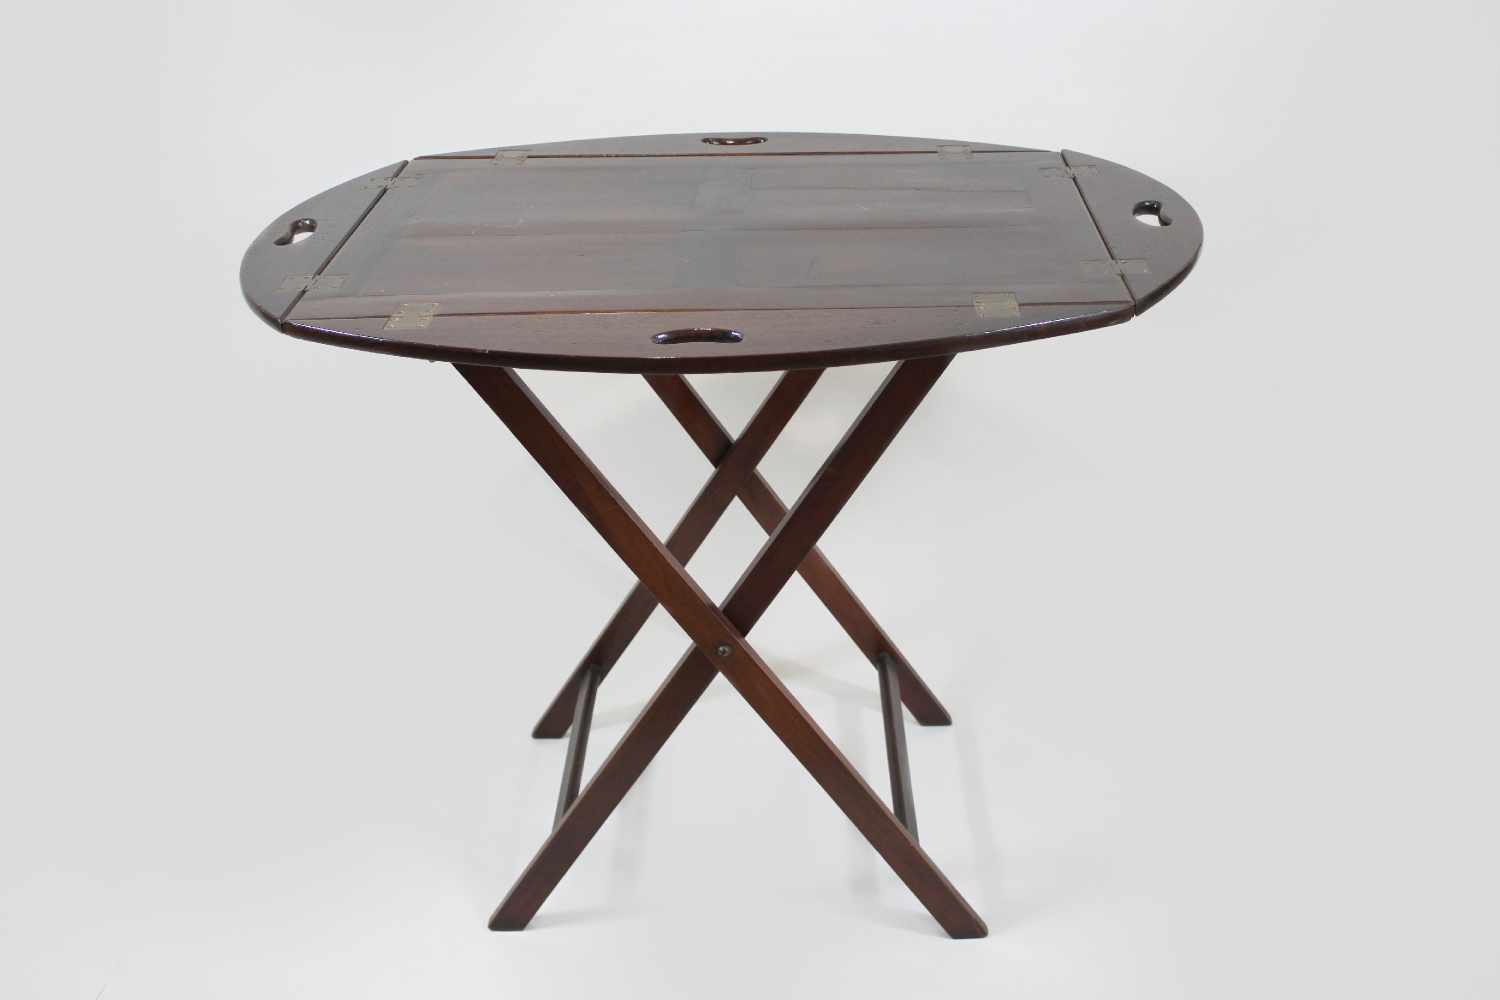 Butlers tray, Tabletttisch, England, 19. Jh., Mahogany, Maße: 79 x 97 x 72 cm (max.). - Image 2 of 2